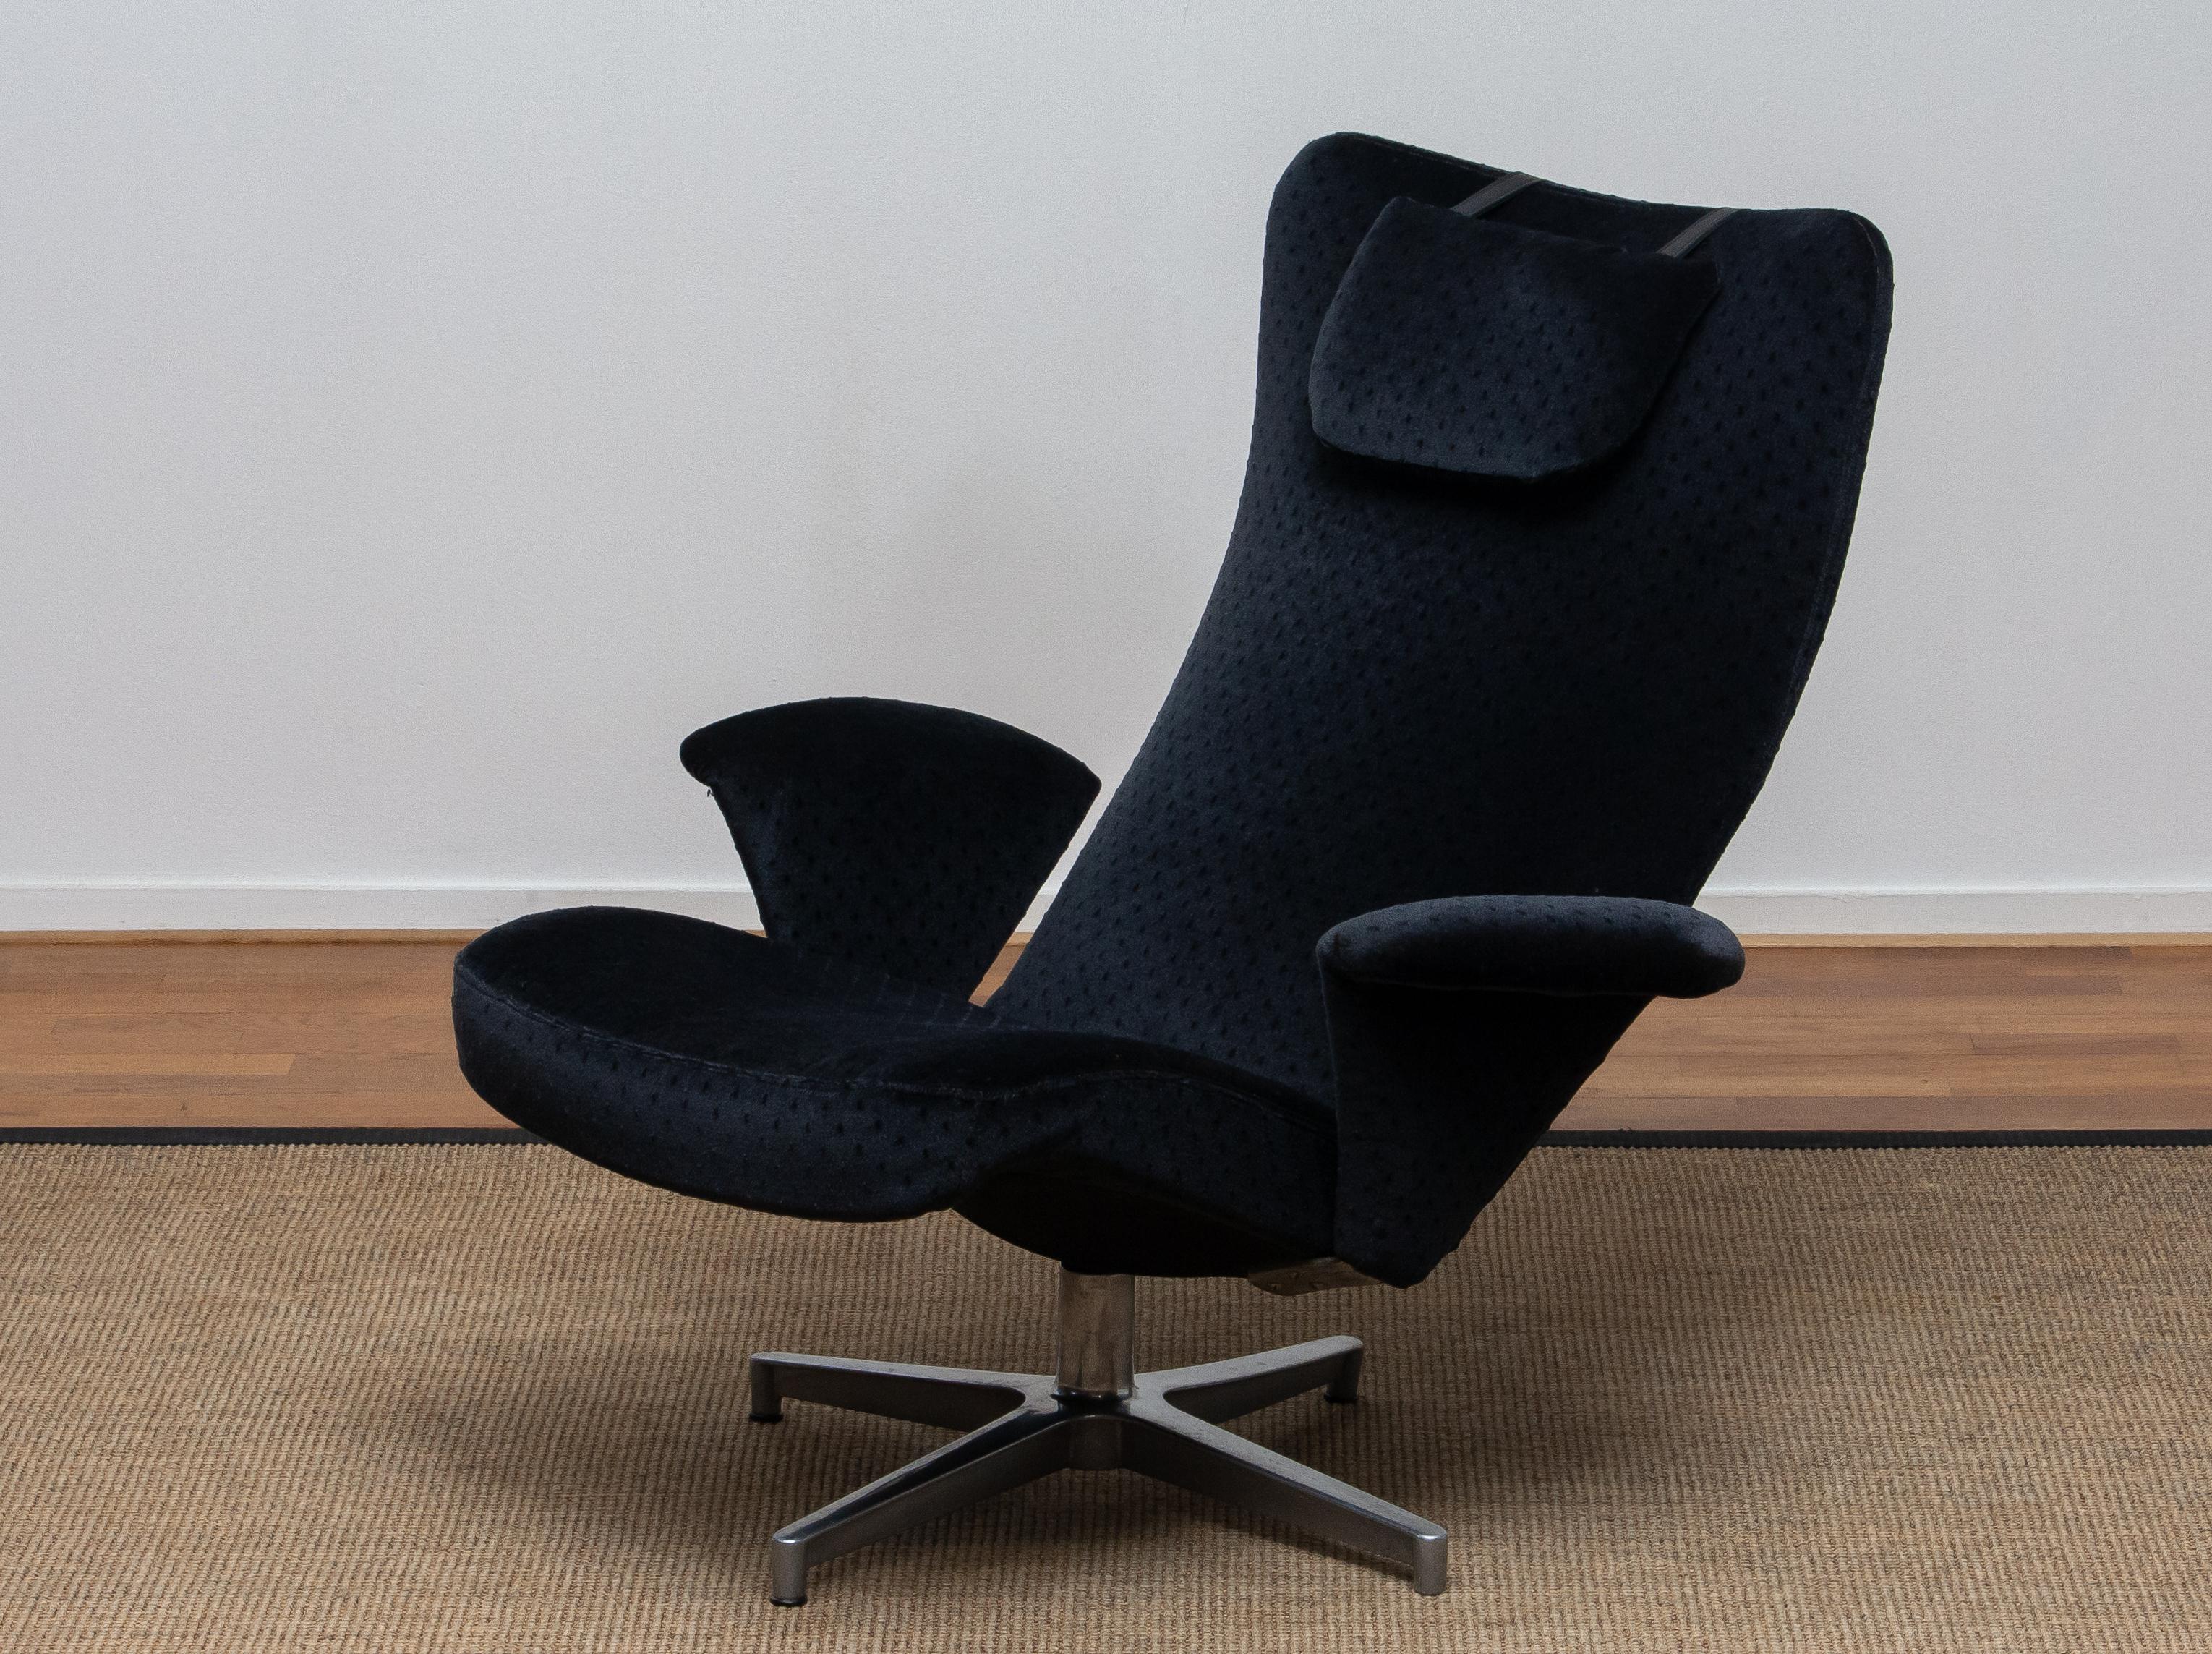 Extremely comfortable swivel chair model; Contourett Ronto